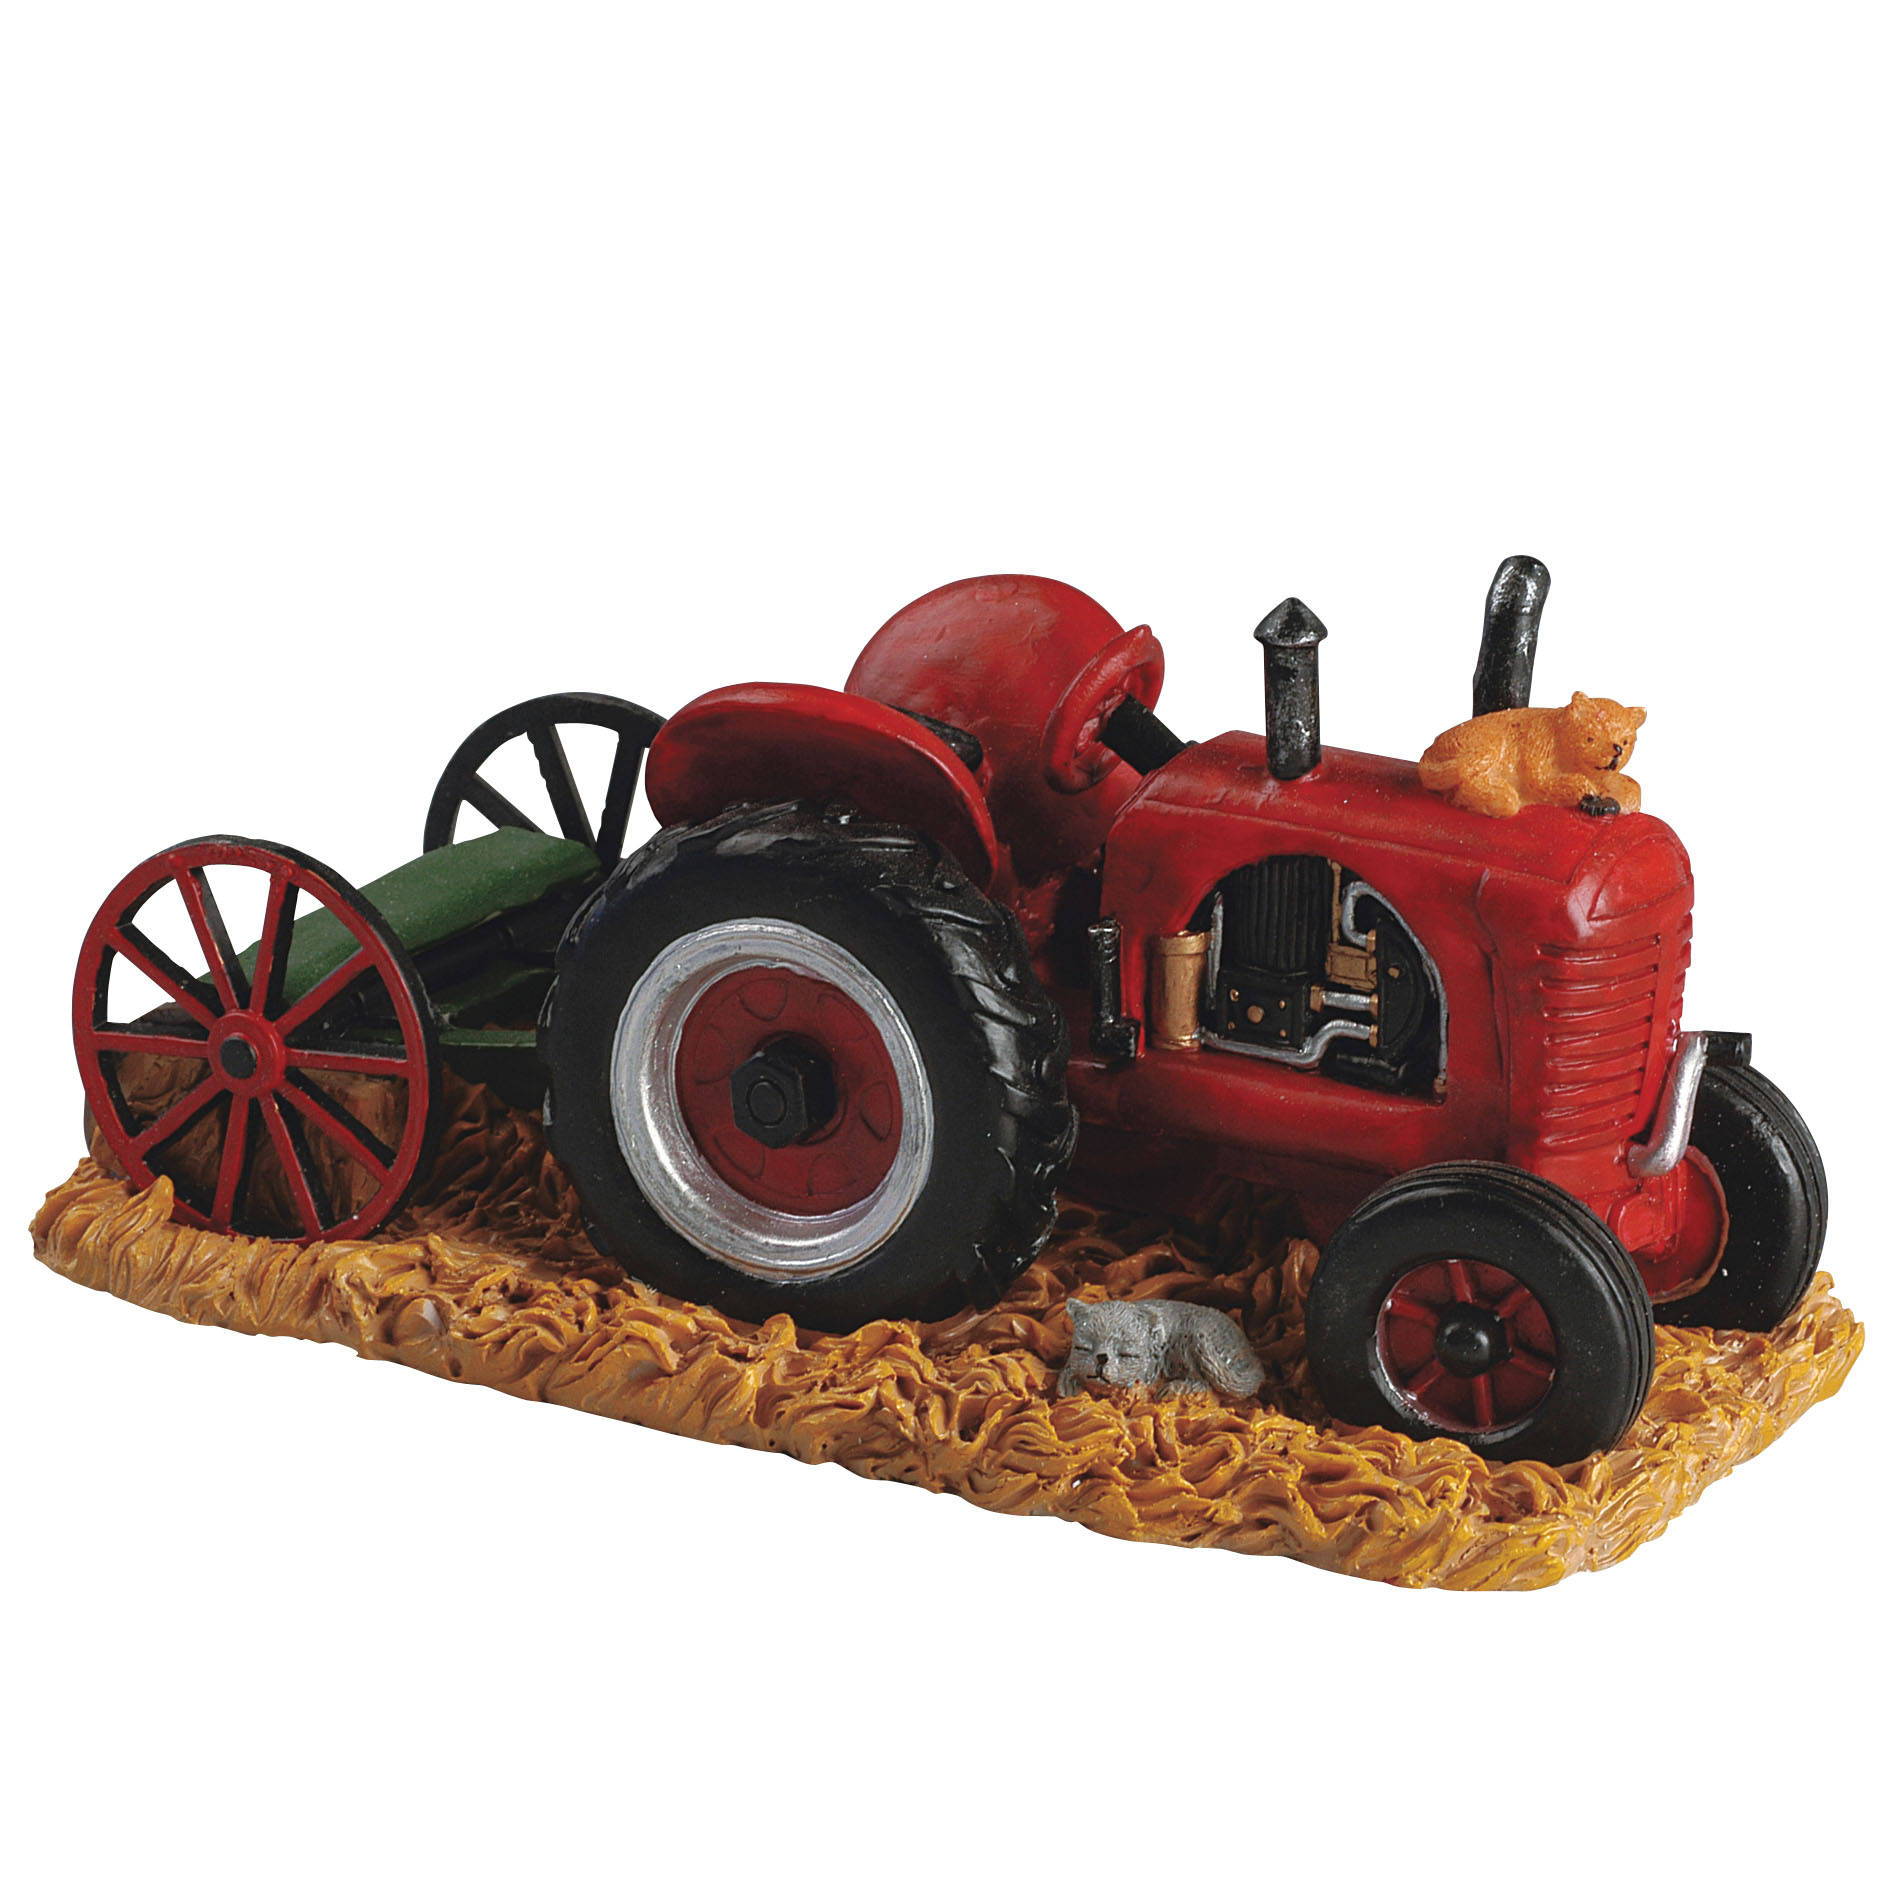 Lemax Village Collection Christmas Village Accessory, The Old Tractor